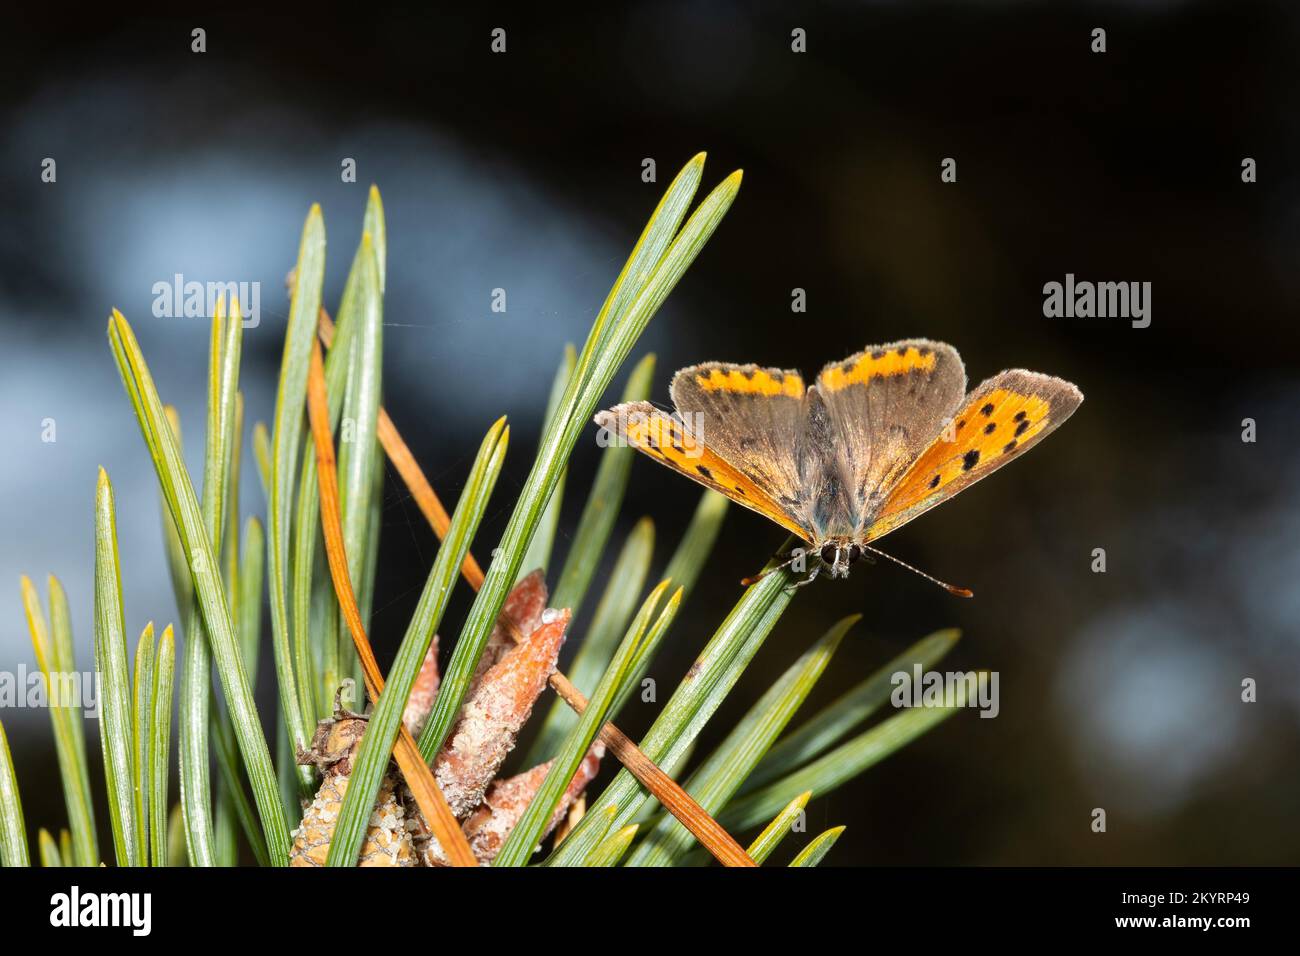 Small fire butterfly butterfly with open wings sitting on pine needle from the front Stock Photo